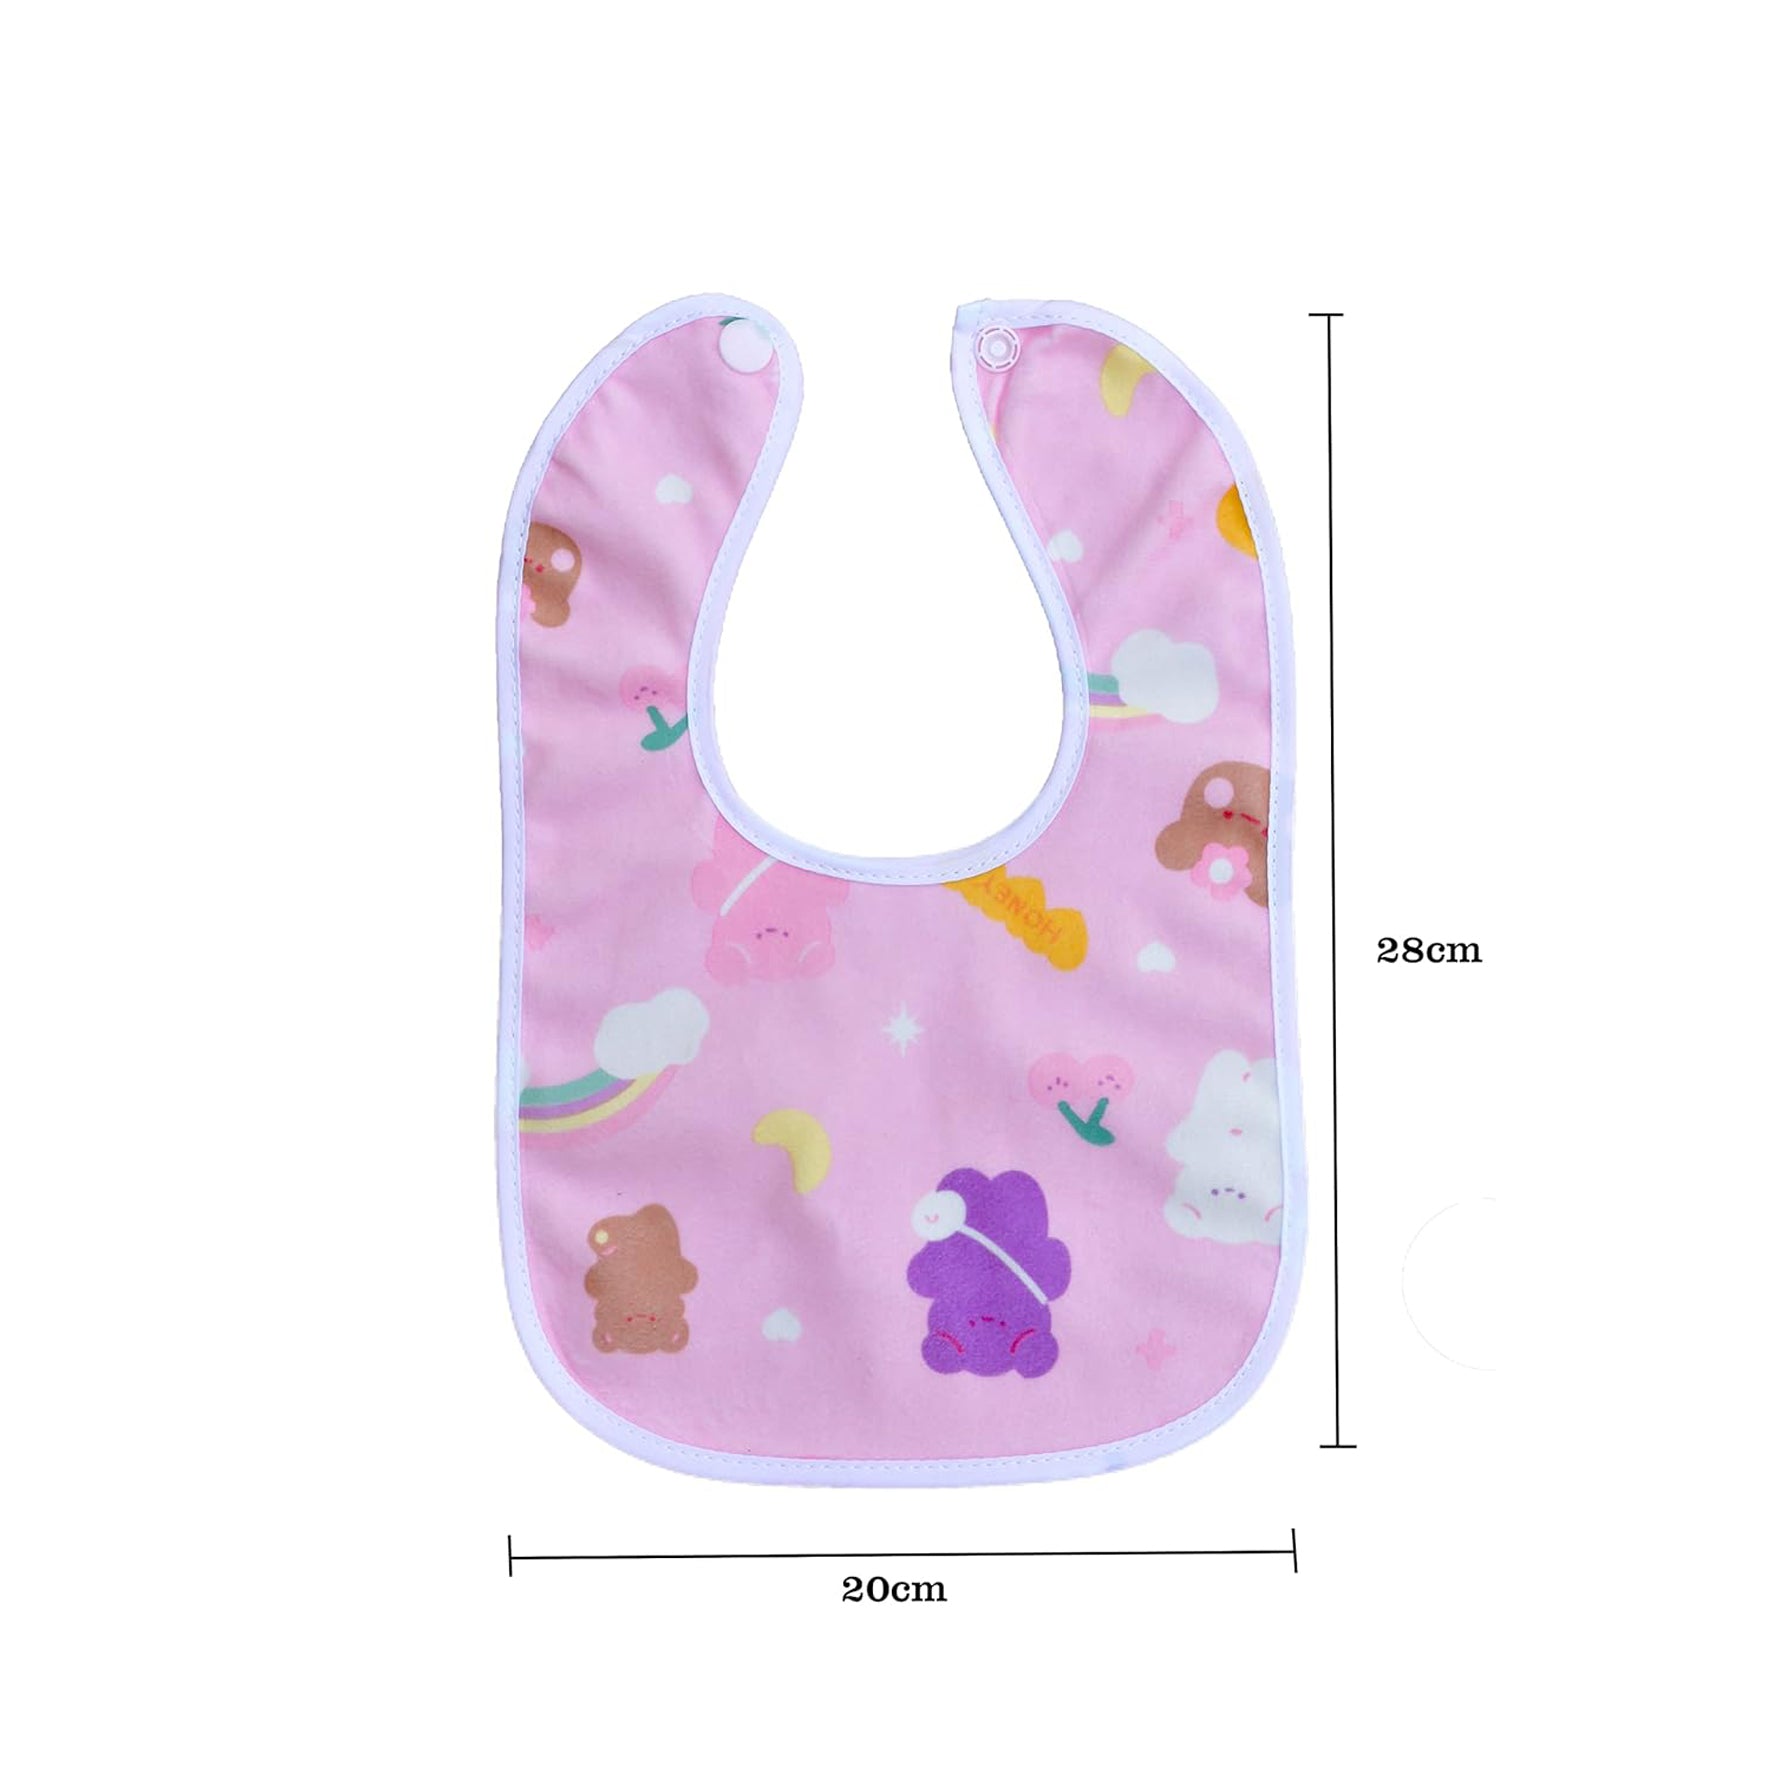 Baby Button Bibs/Apron Cute Overall Print with Tich Button| Soft Cotton Fabric with PVC on Back/Quick Absorption & Fast Drying for Babies/Newborns/Infants (Pack of 3)